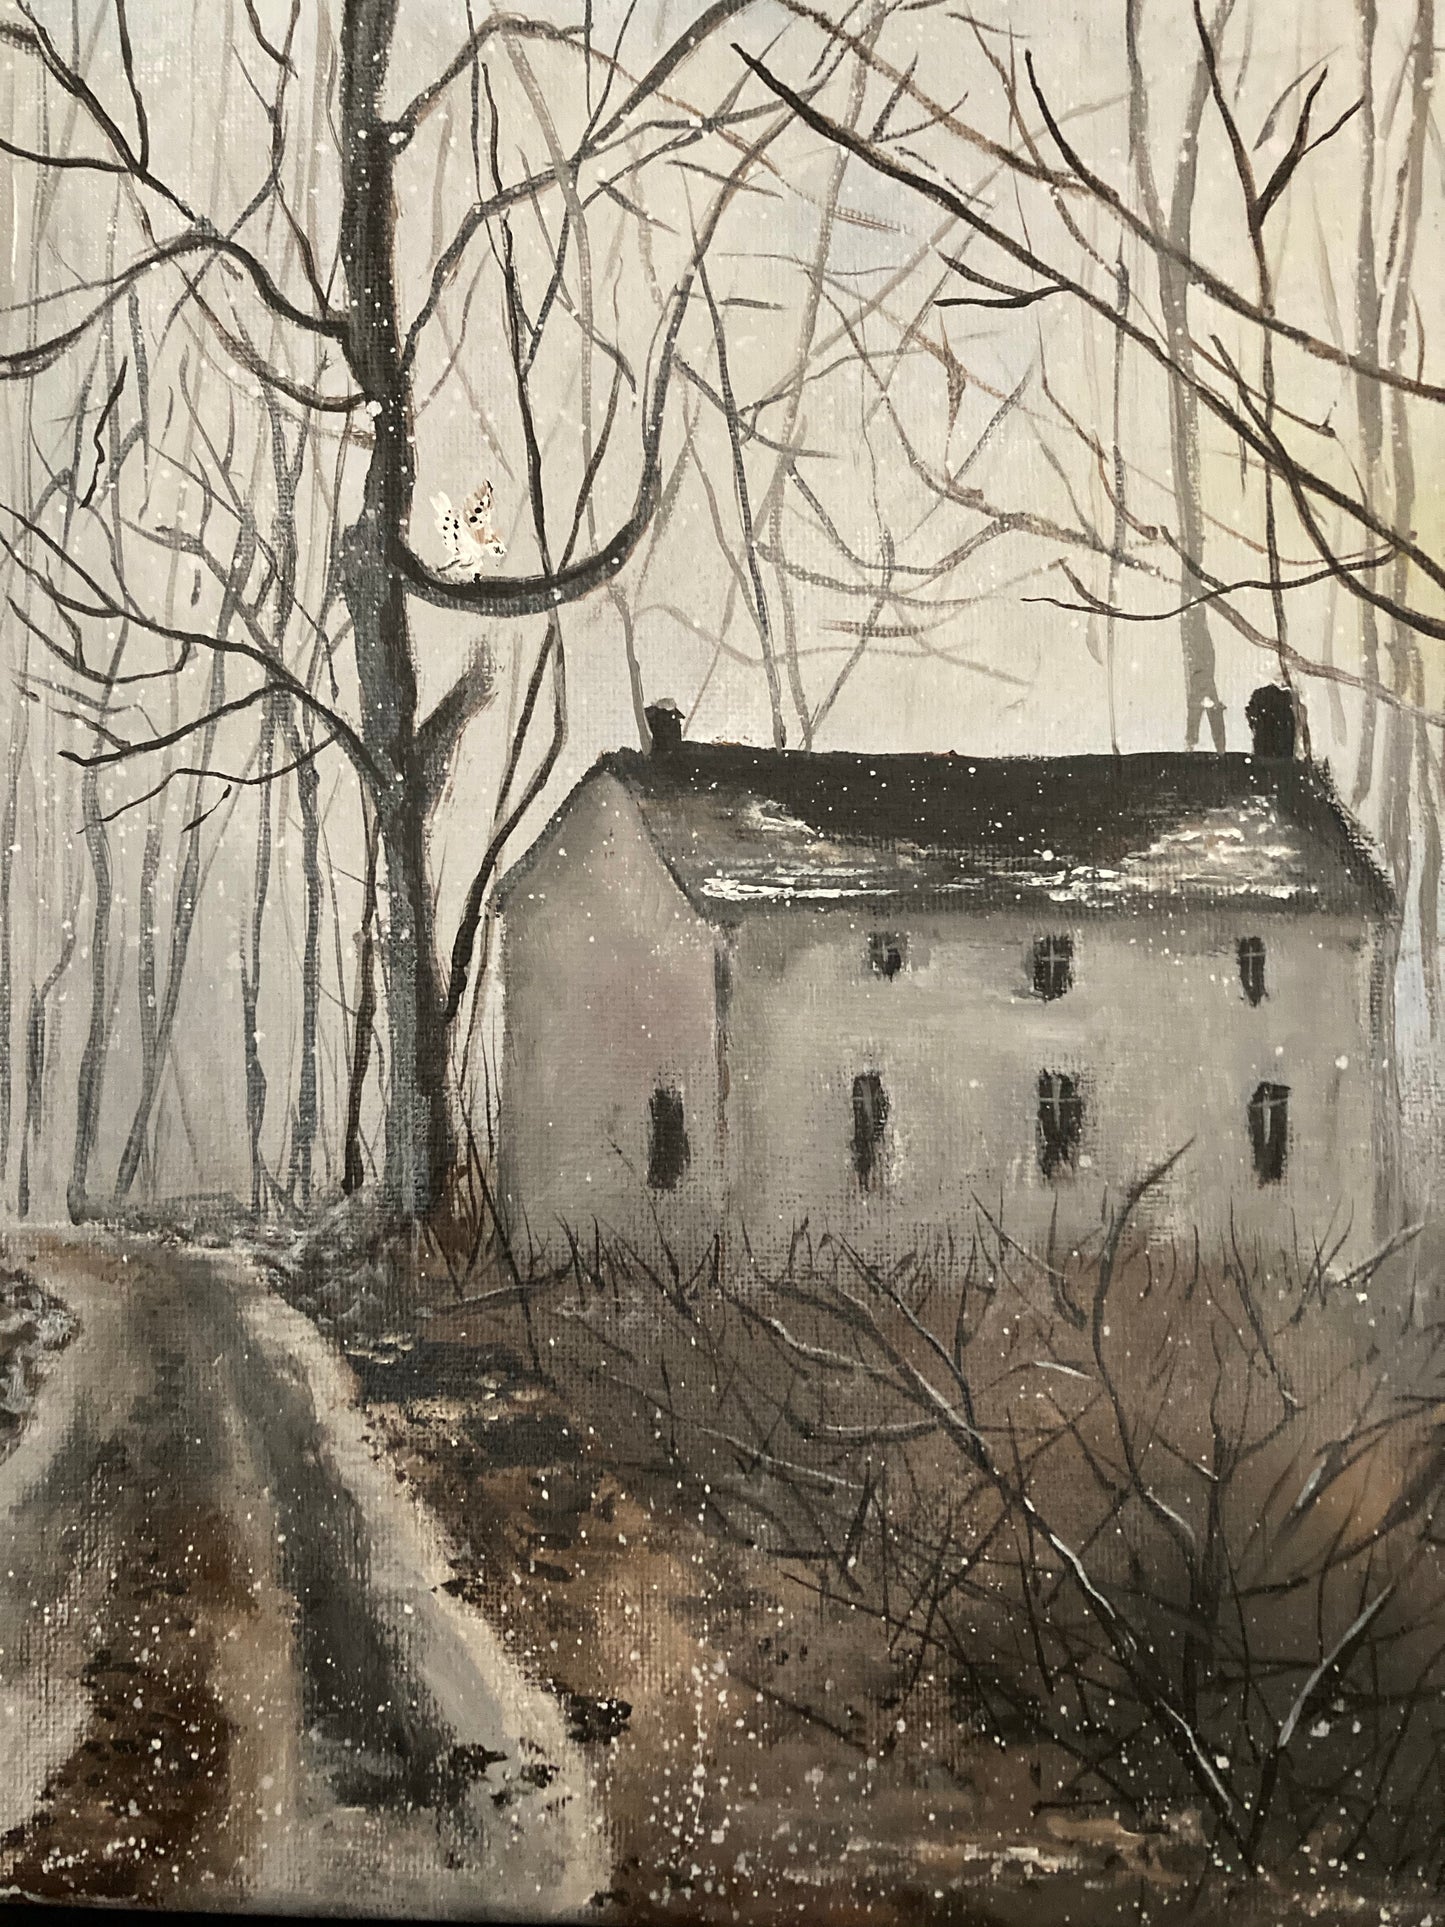 “The Farmhouse in the Woods”